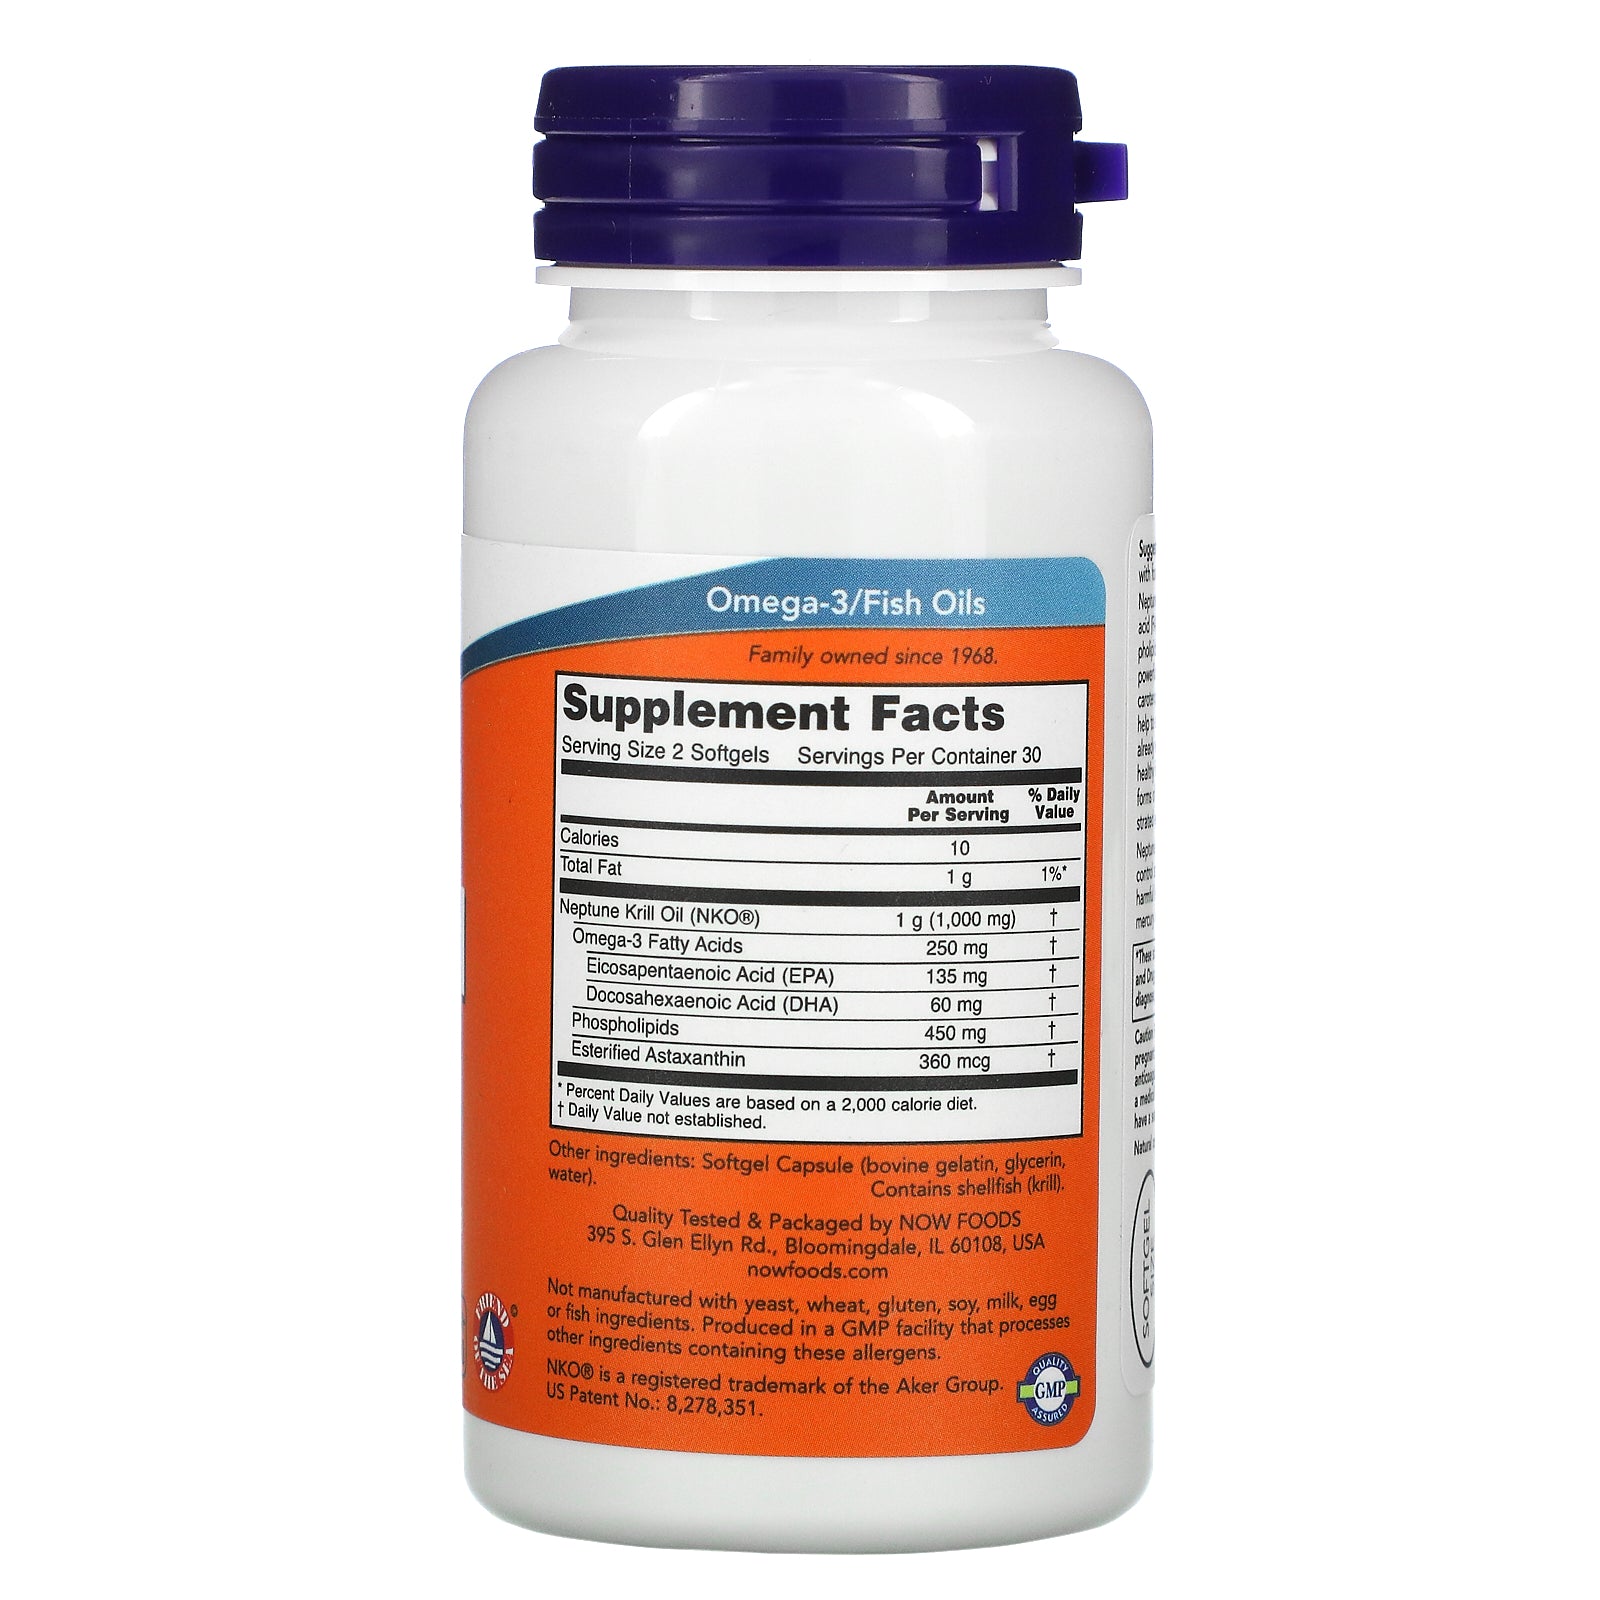 Now Foods, Neptune Krill Oil, 500 mg, 60 Softgels